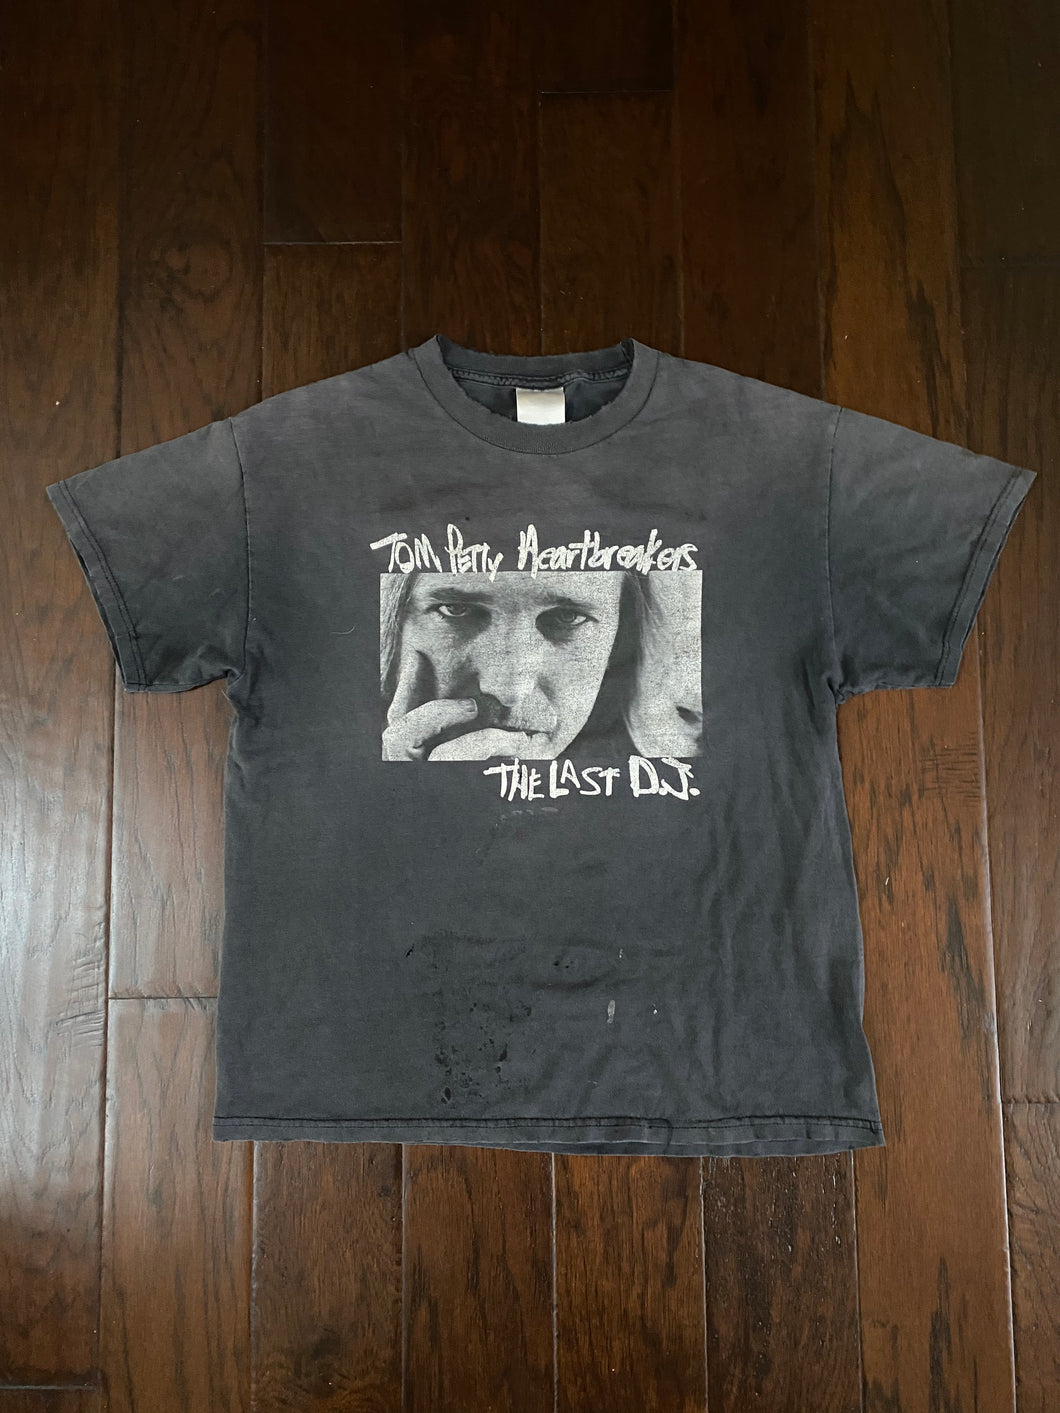 Tom Petty & The Heartbreakers 2002 “The Last D.J.” Vintage Distressed T-shirt